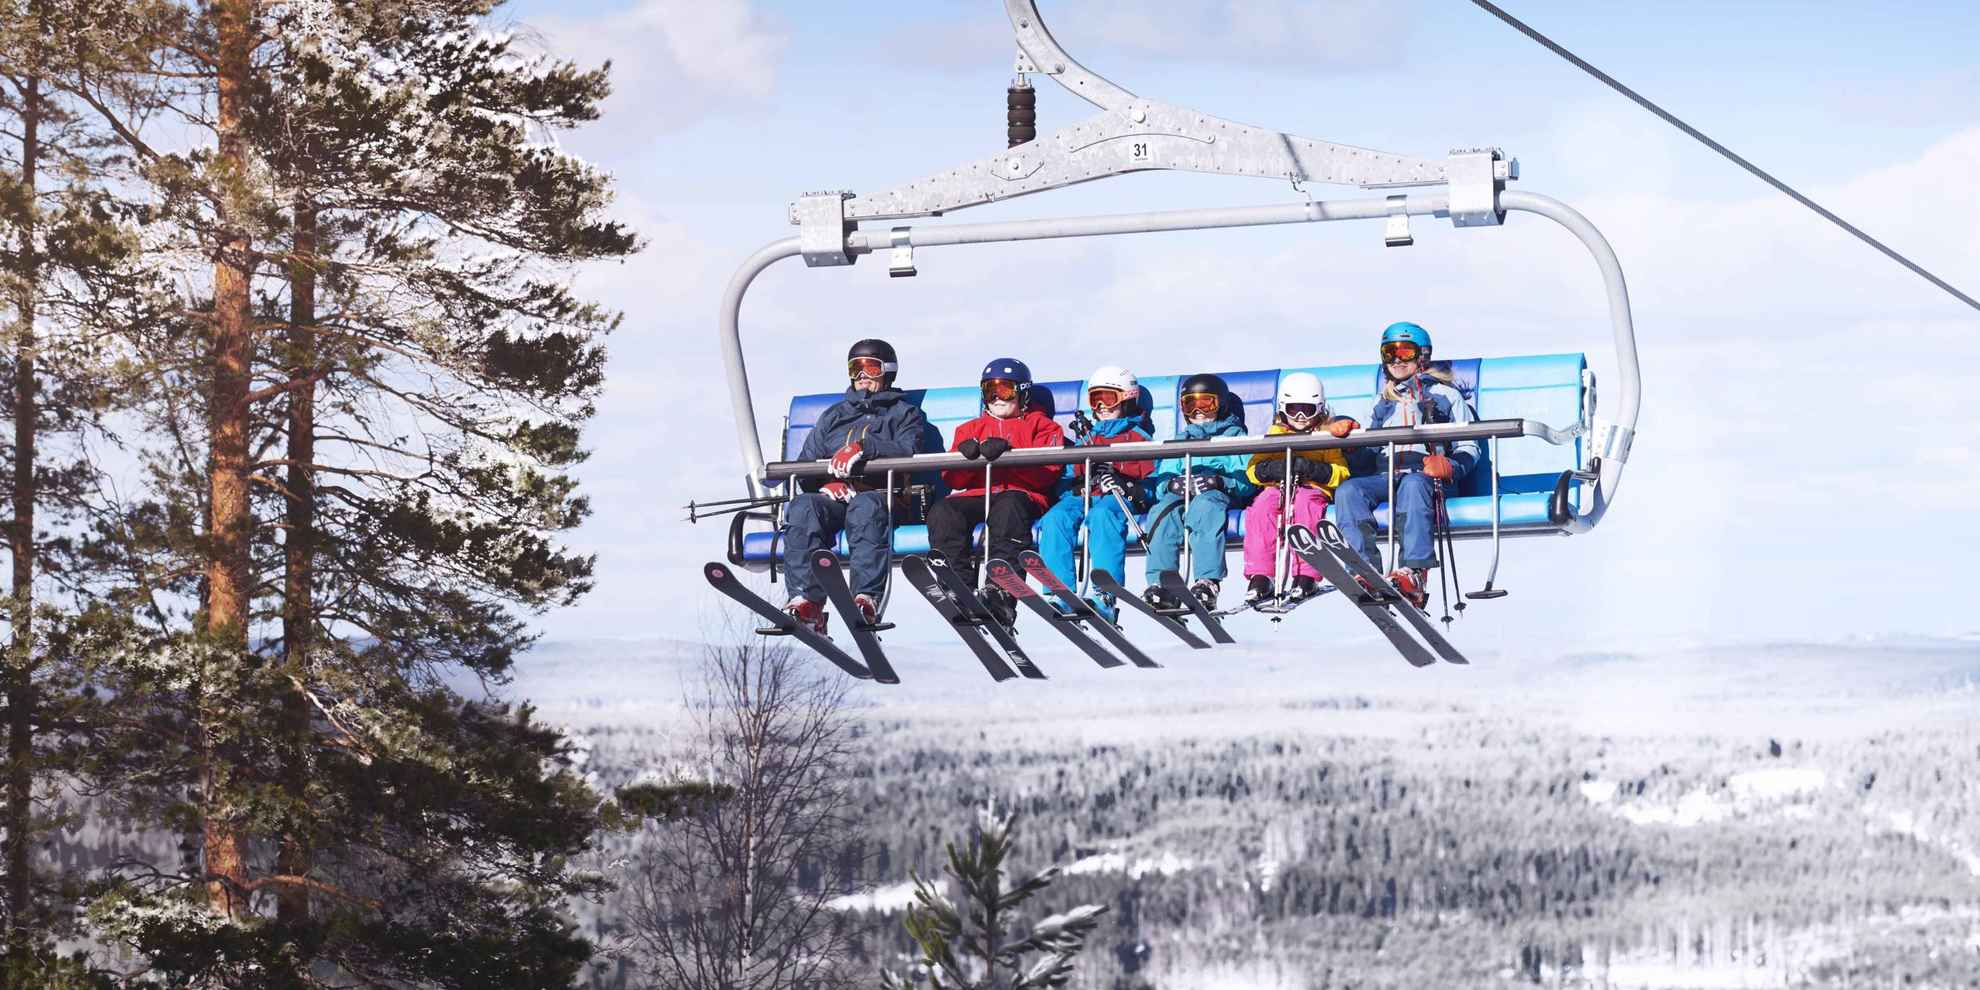 A family of six people sits in a ski lift with ski gear going up a hill during winter.